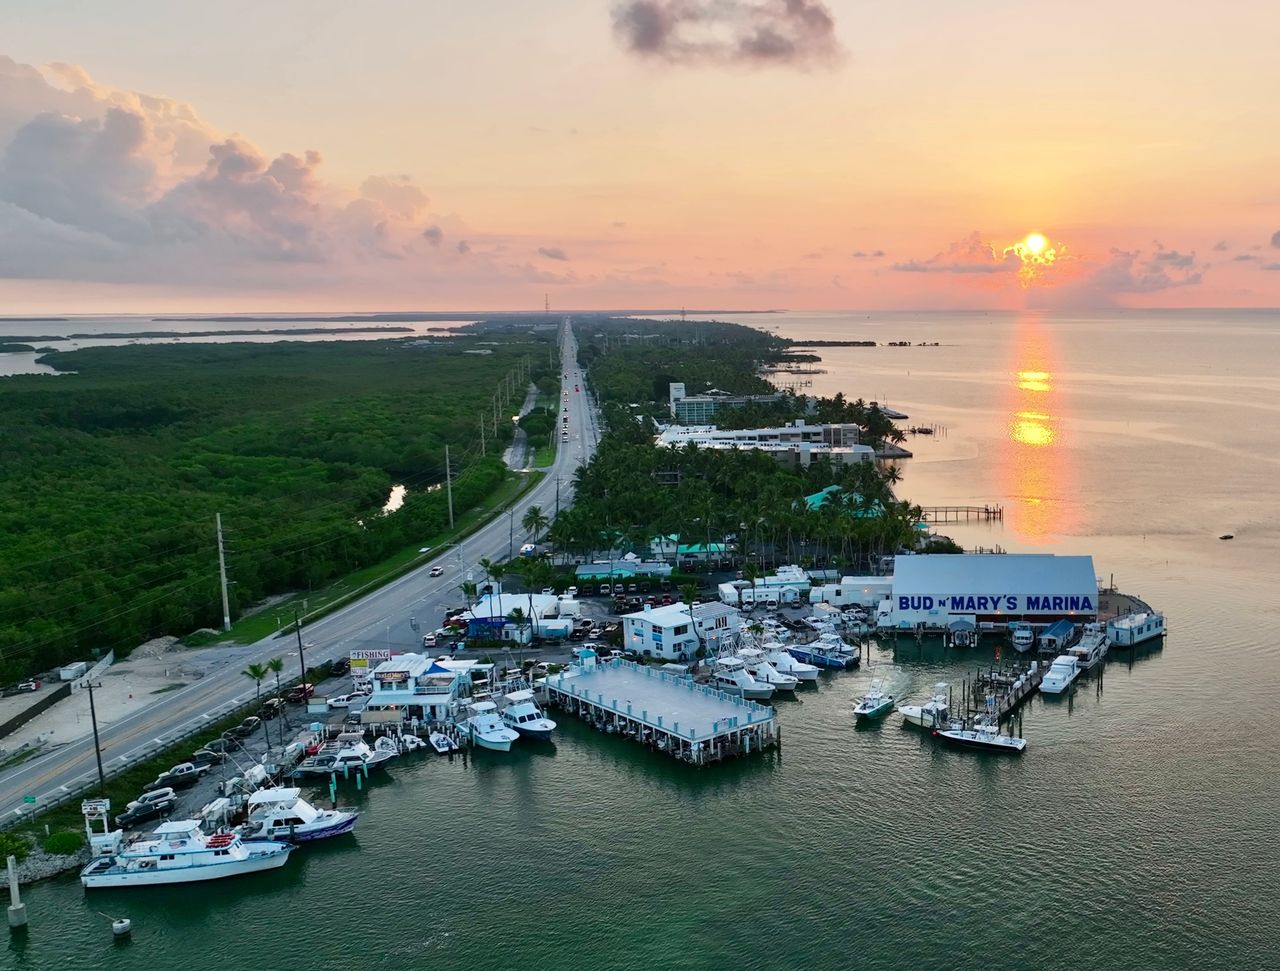 Bud n' Mary's Marina in Islamorada is to host the bicentennial sea-to-table dinner on June 10. 